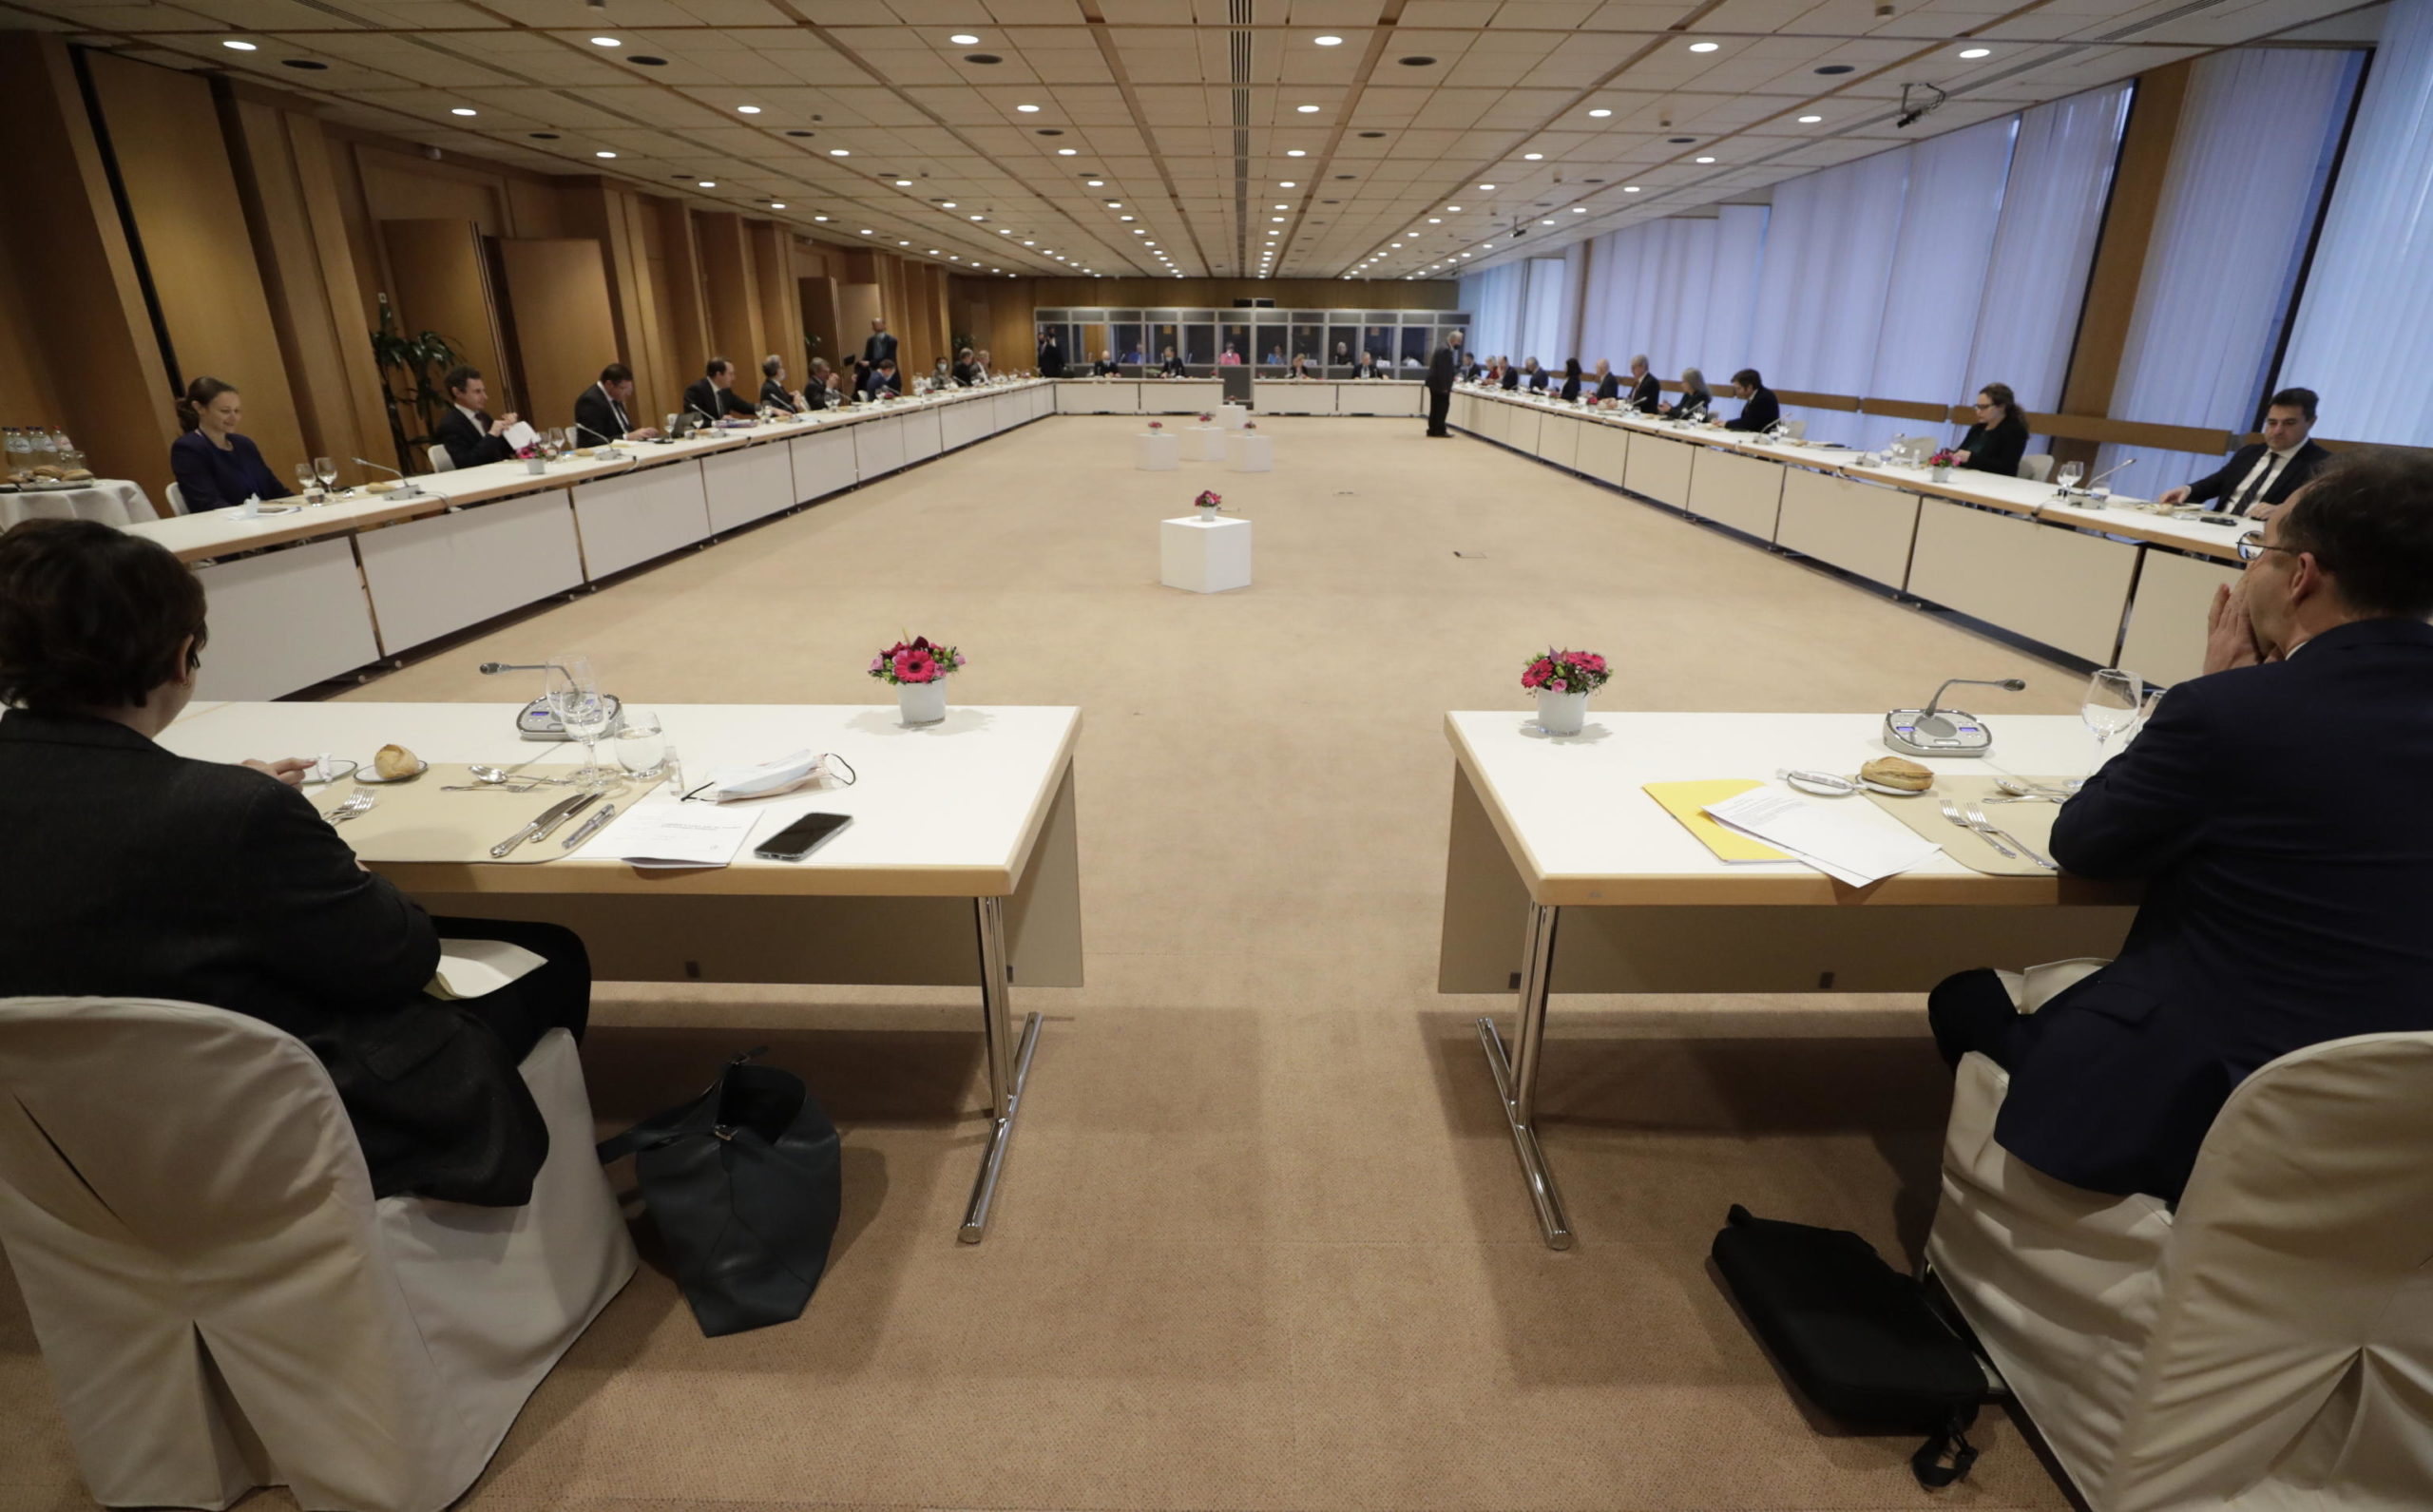 epa08968372 A general view of a meeting of the Coreper, the 'Committee of the Permanent Representatives of the Governments of the Member States to the European Union', at the European Council building in Brussels, Belgium, 27 January 2021.  EPA/OLIVIER HOSLET / POOL